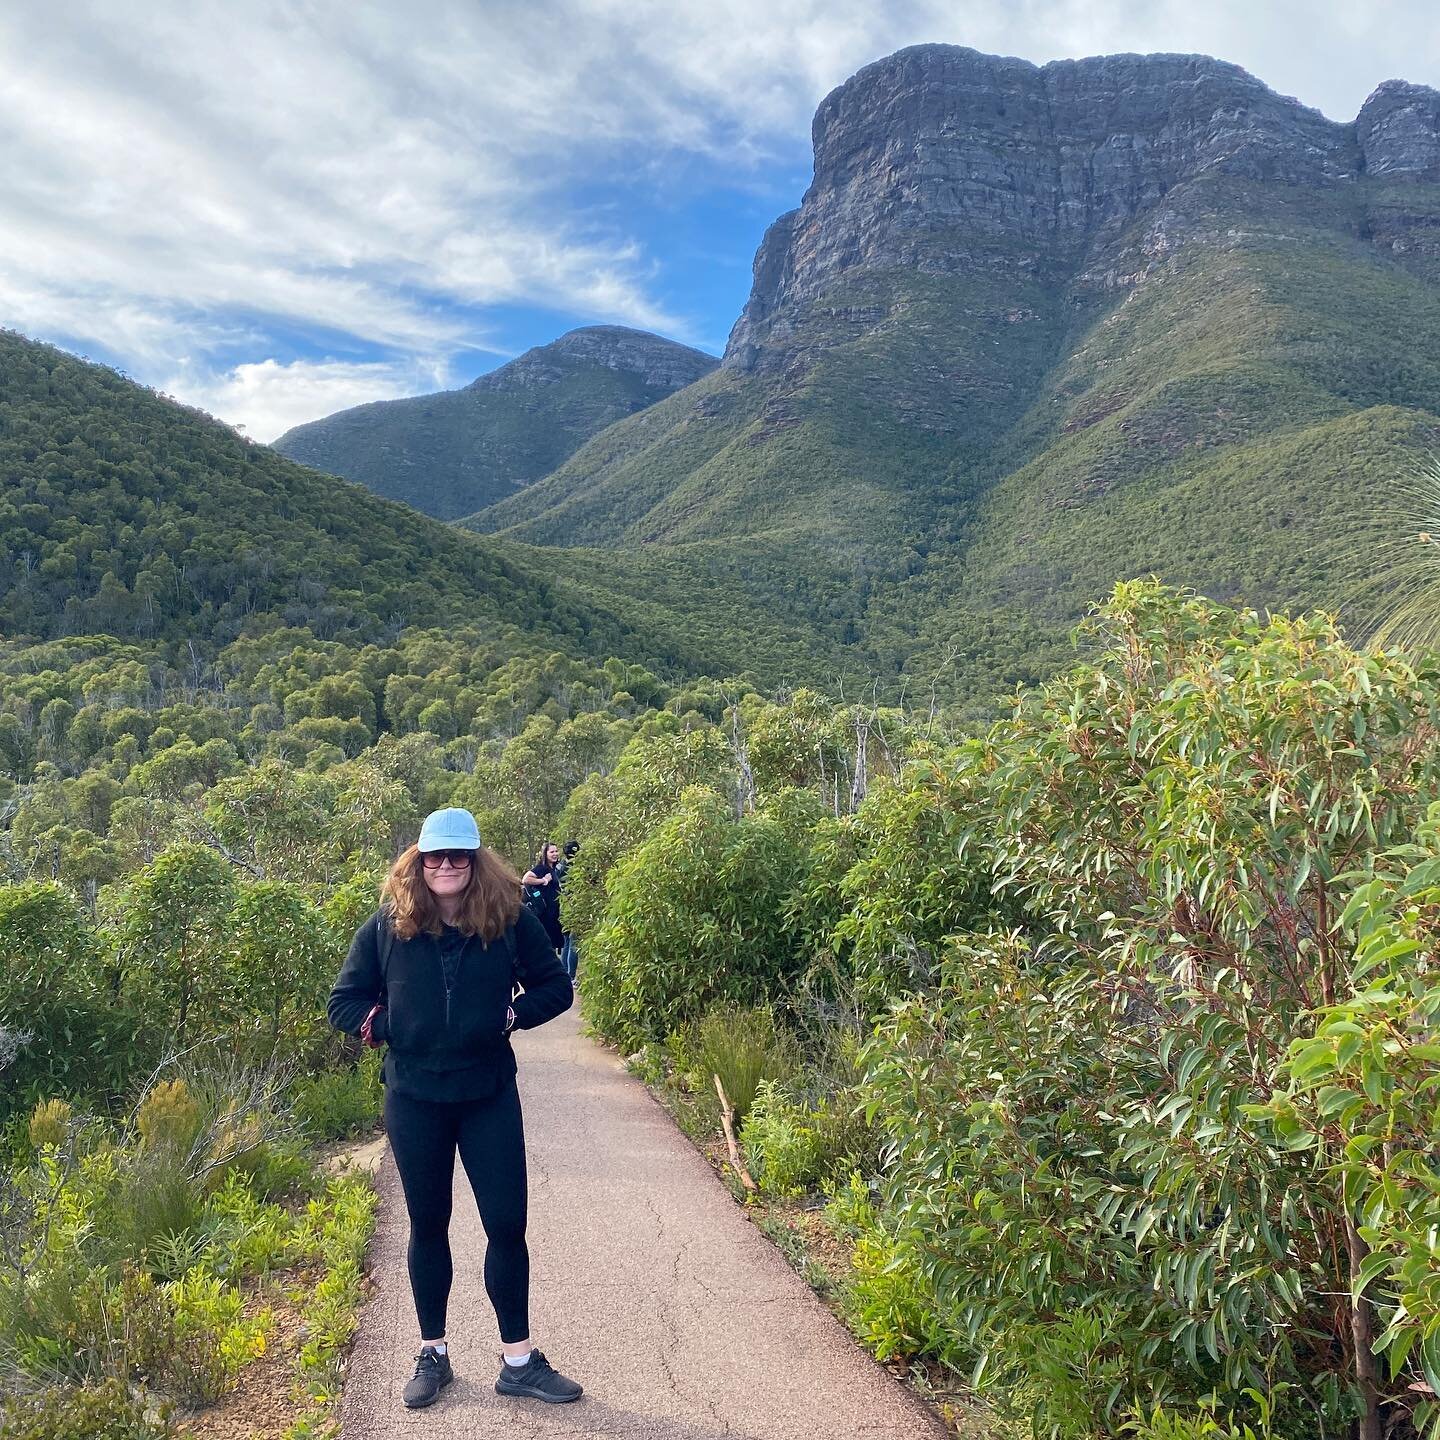 Over the weekend, I climbed Bluff Knoll in Albany for Anzac Day. It was an amazing, yet steep and what an experience. The mountain serves as a great metaphor for life's challenges. Bluff Knoll stands at a height of 1,099 metres (3,606 ft) above sea l